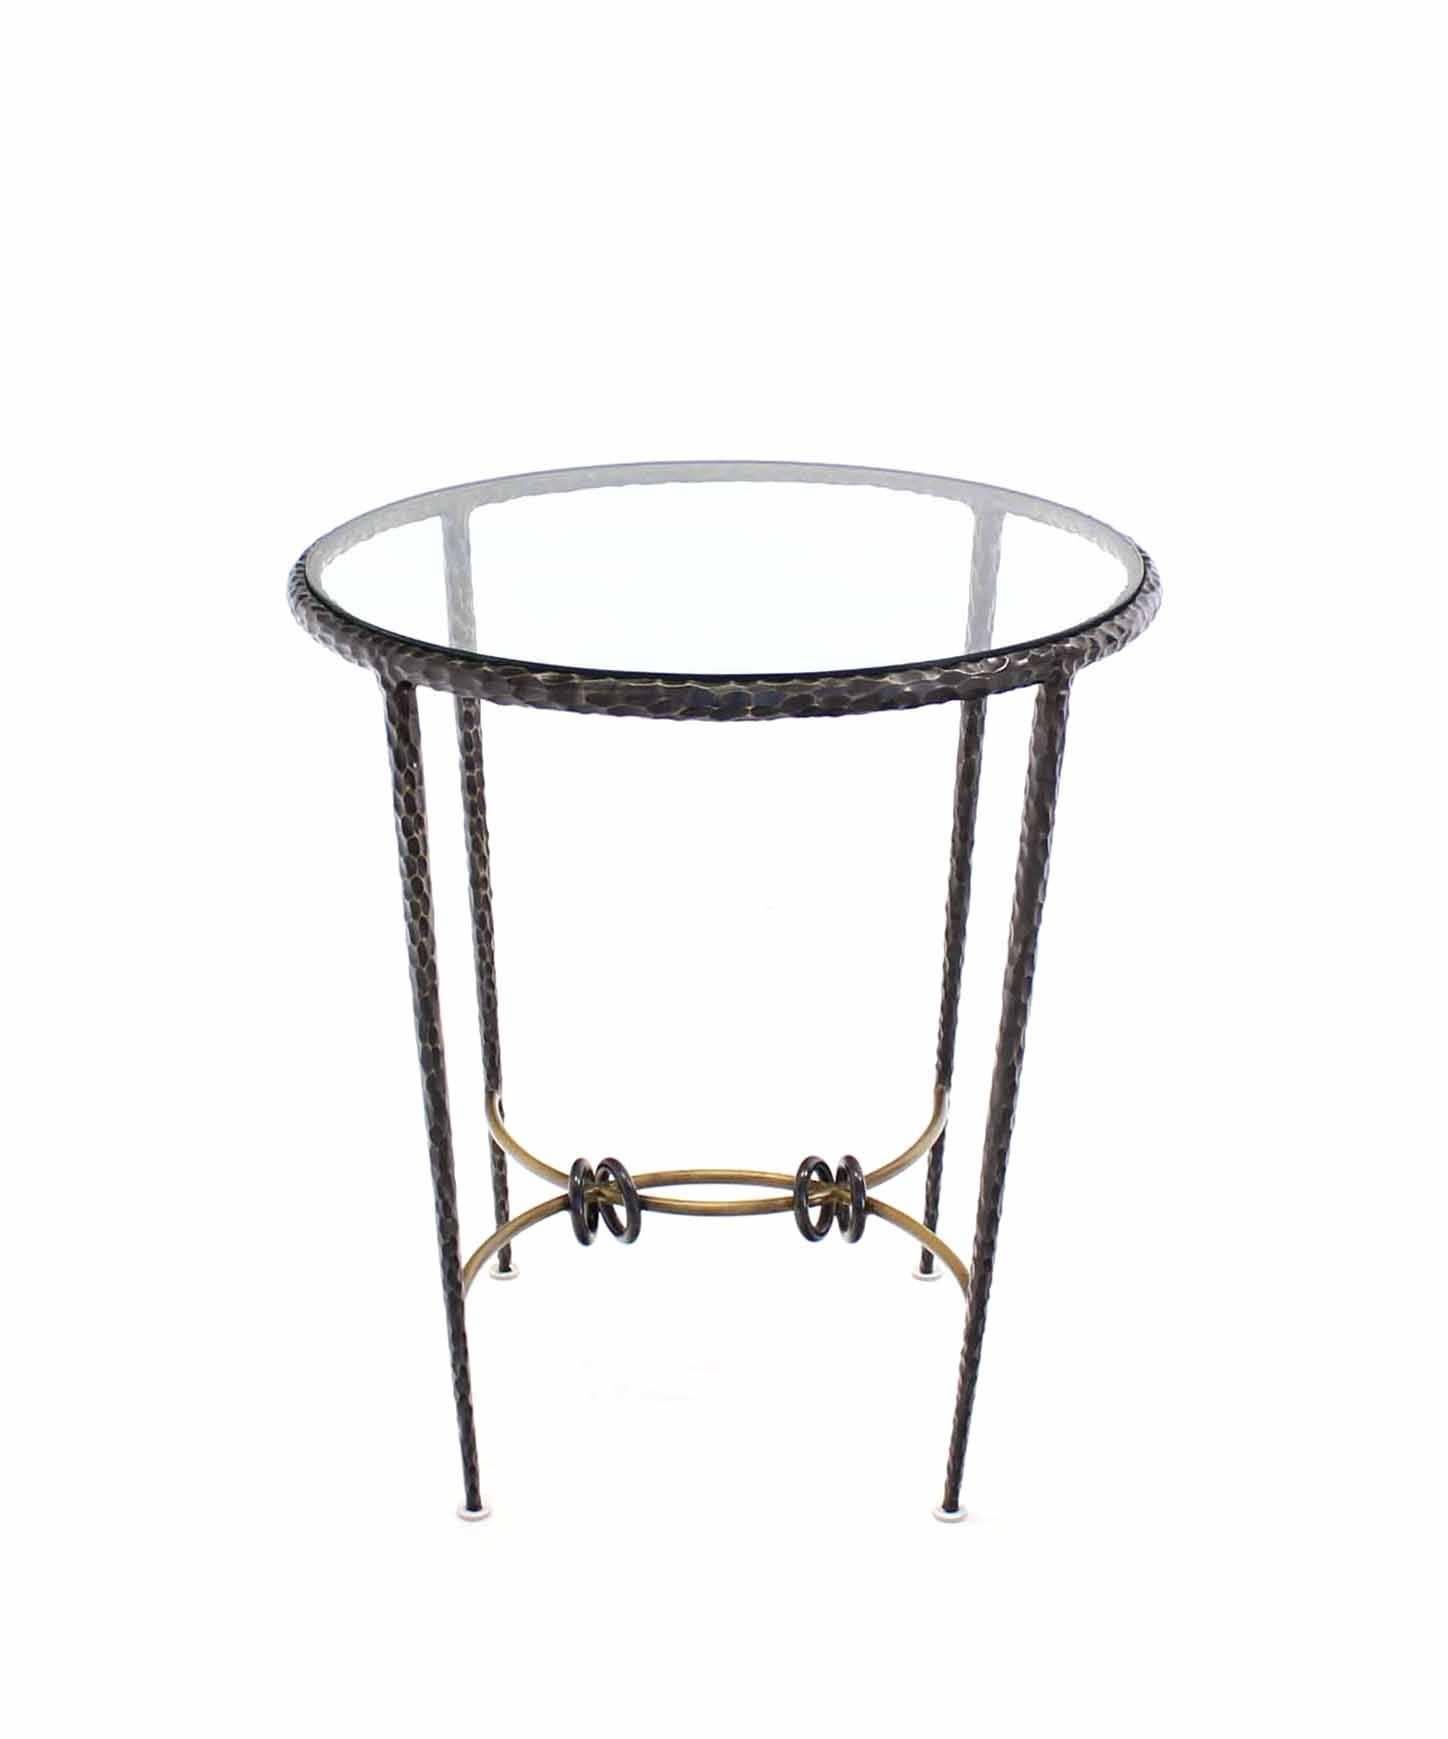 Mid-Century Modern Round Hammered Heavy Solid Brass Tapered Legs Glass Top Center Lamp Side Table For Sale